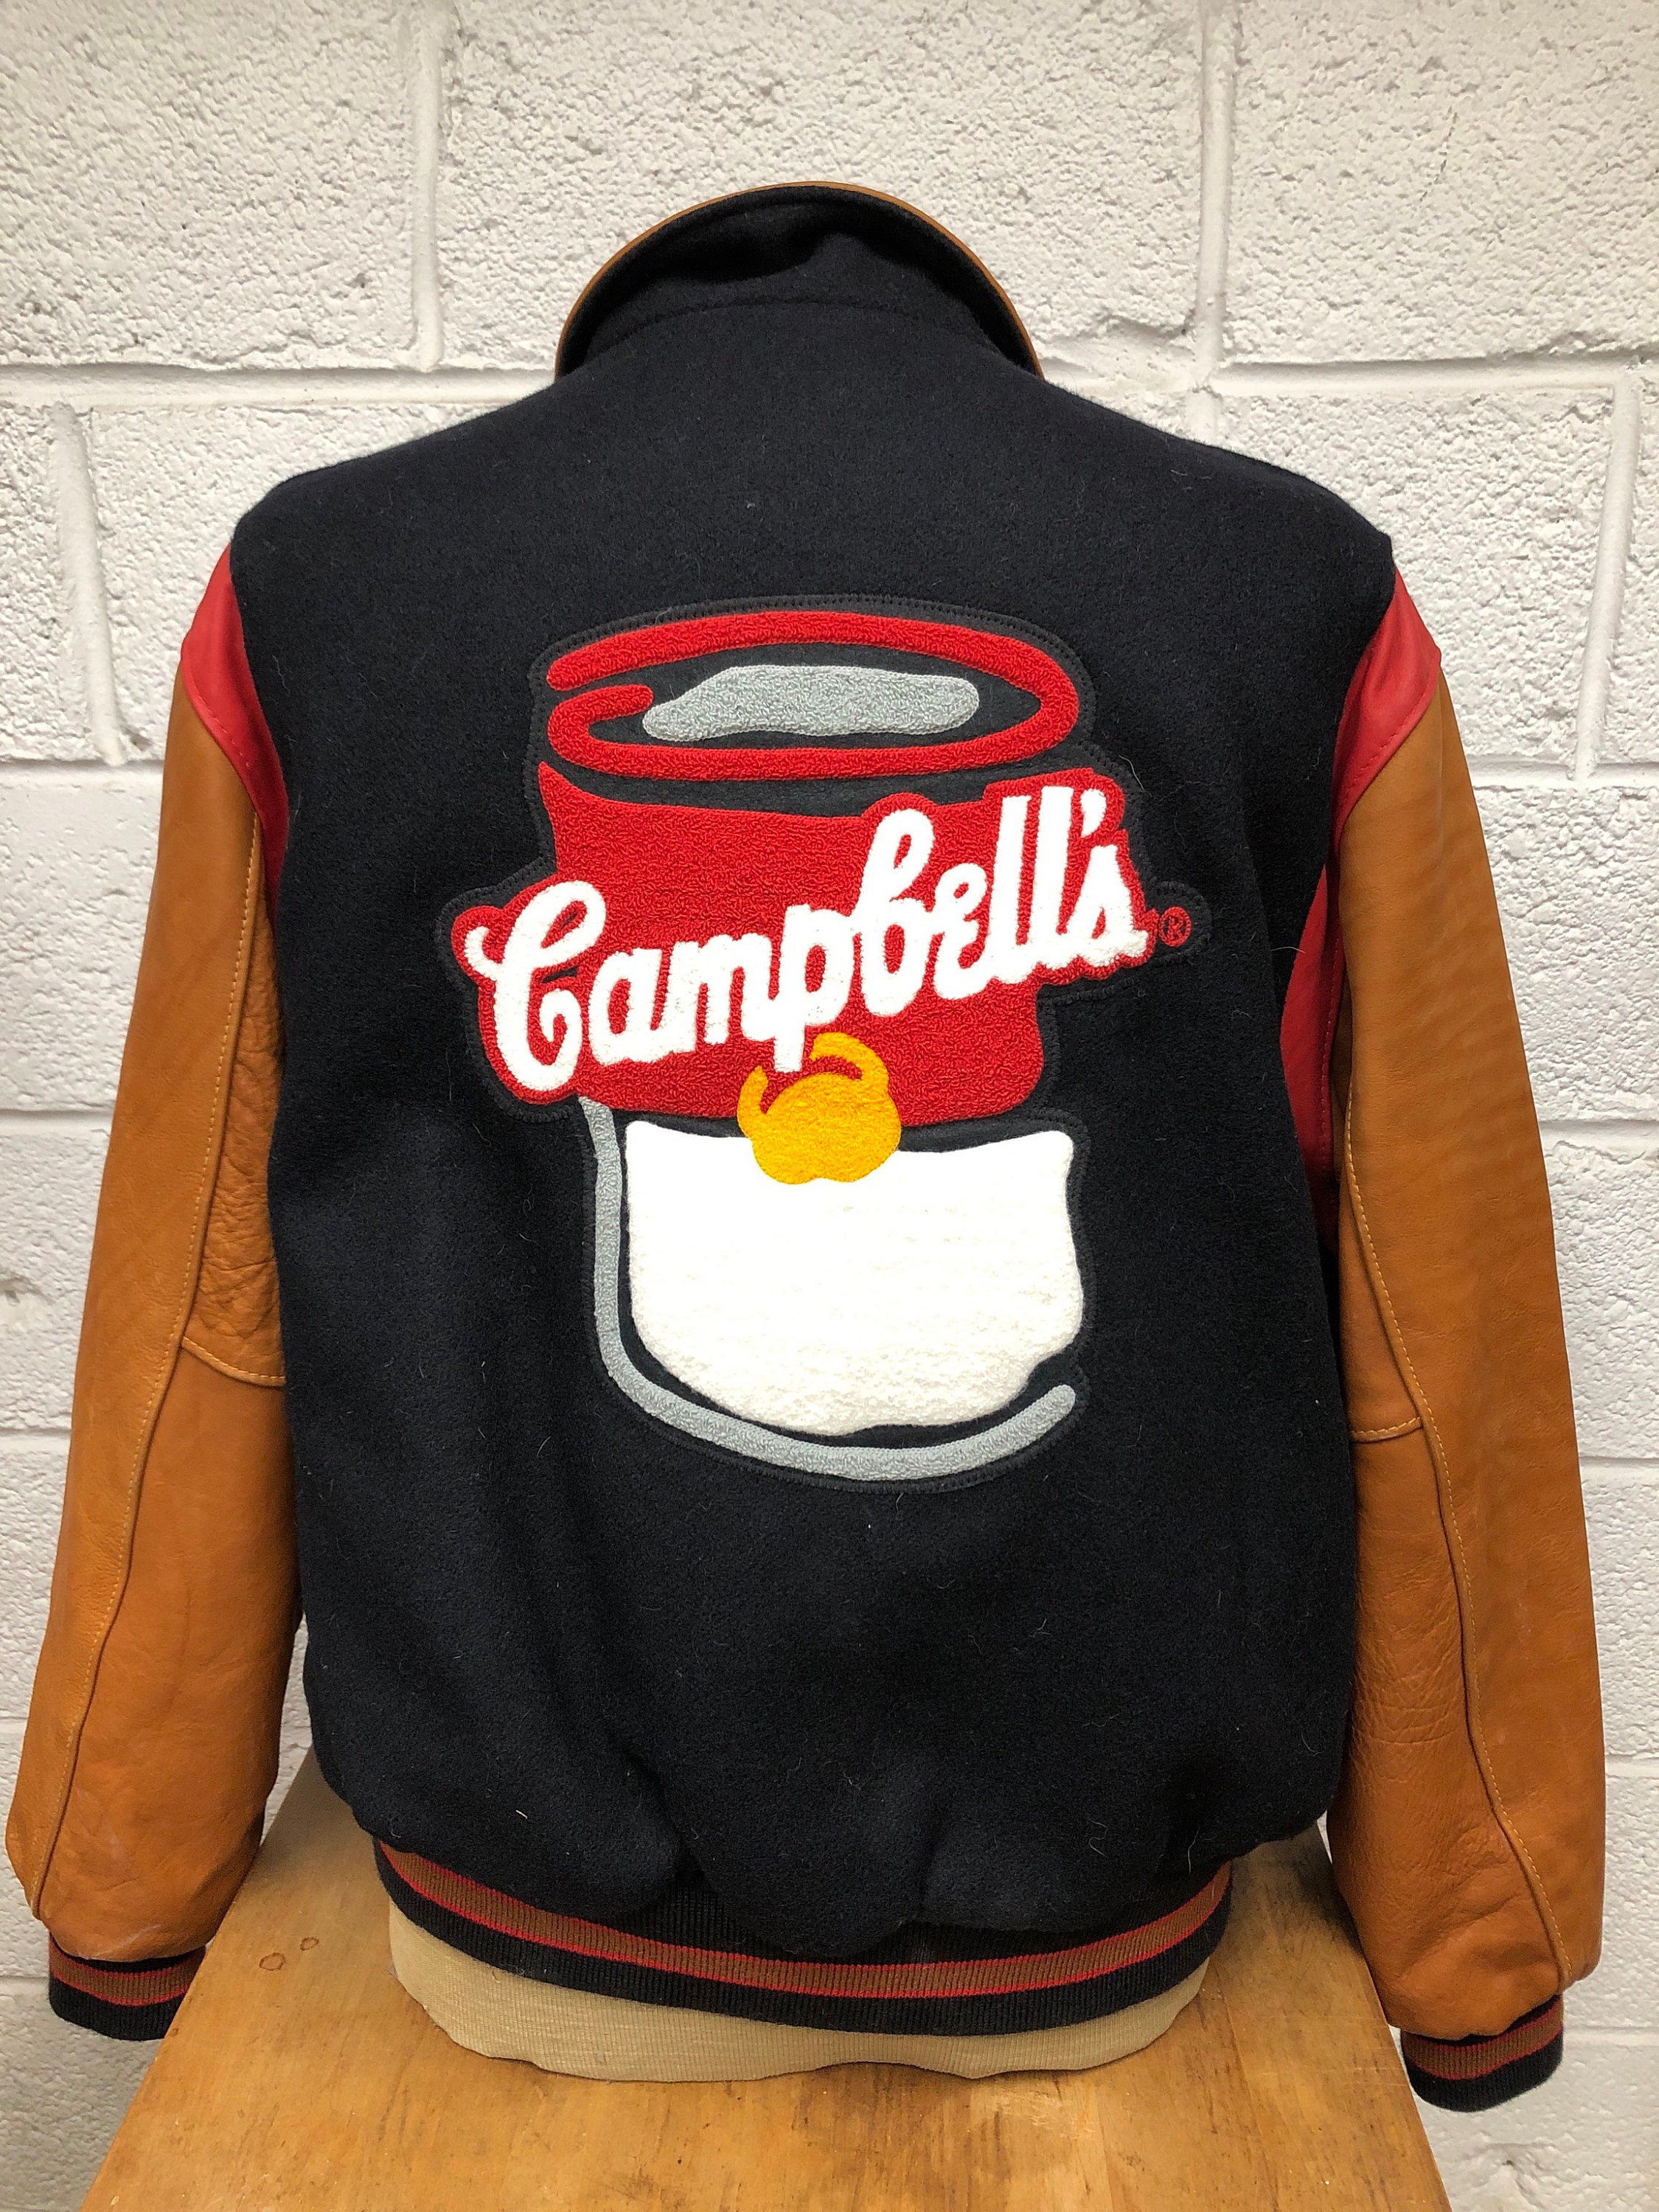 Campbells Soup leather and wool varsity-style jacket 1990s | Etsy